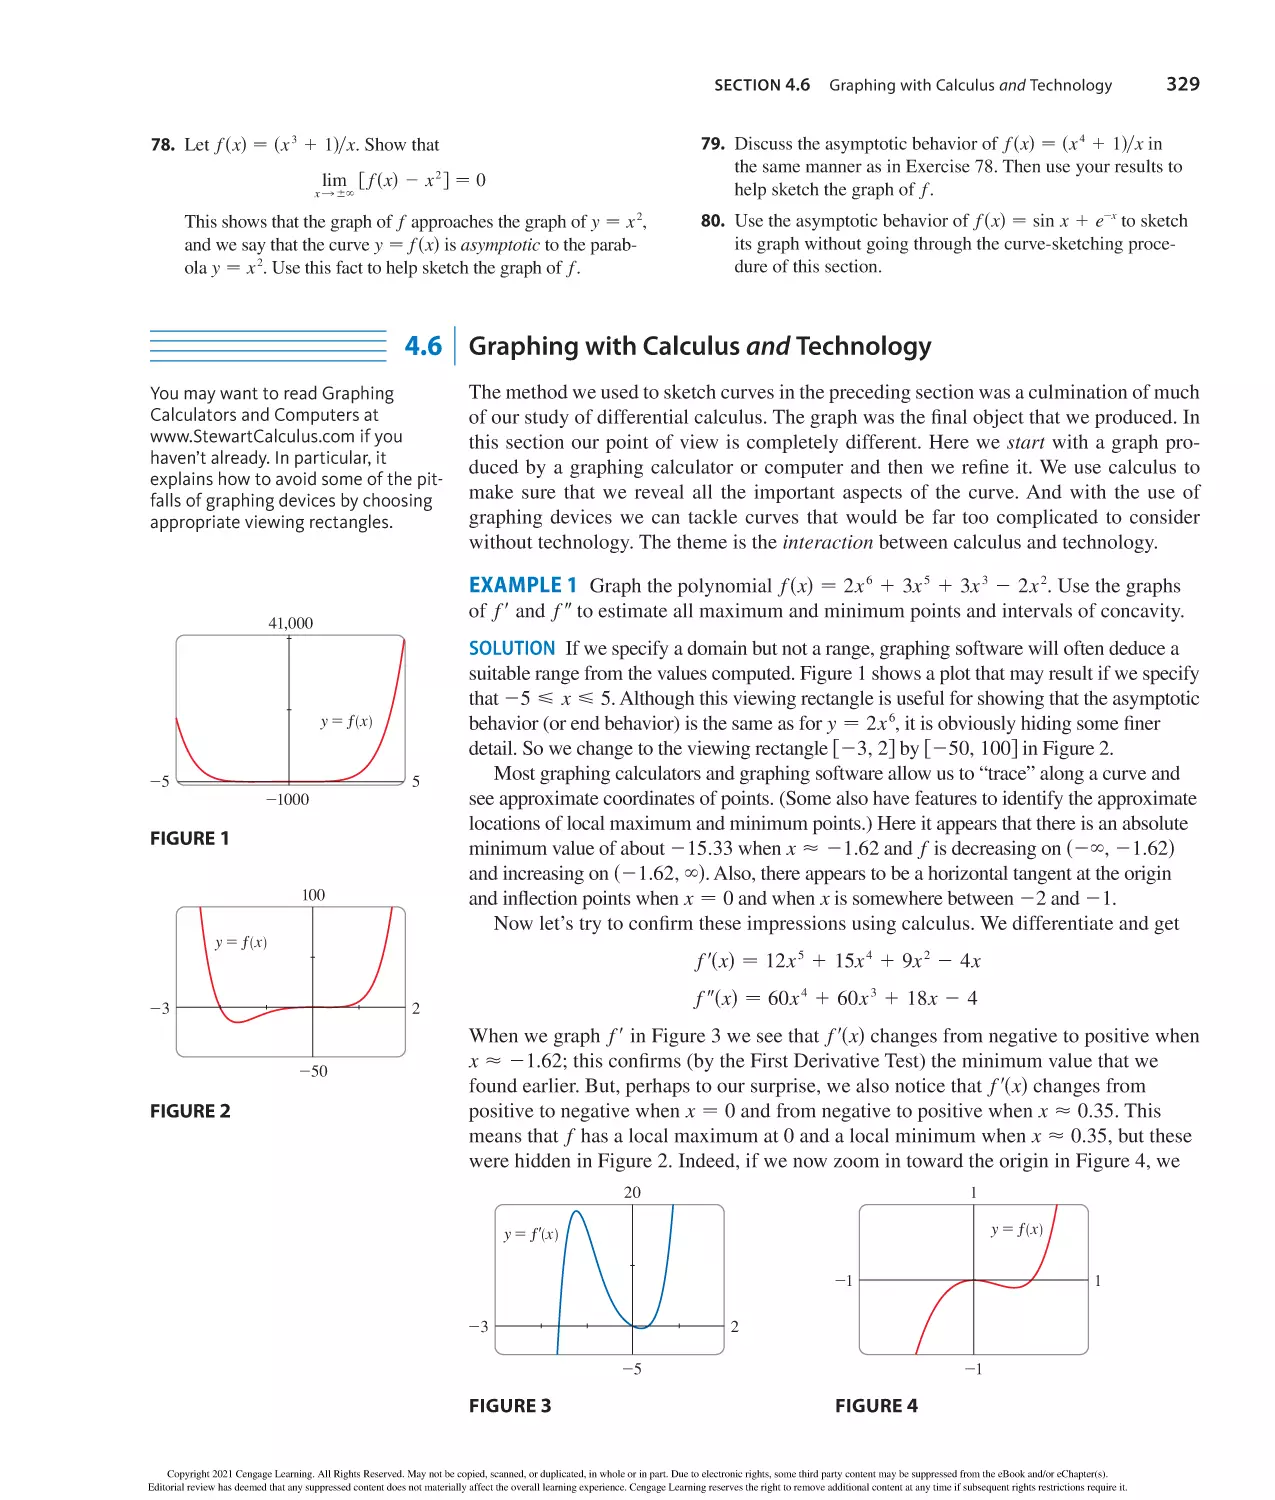 4.6 Graphing with Calculus and Technology